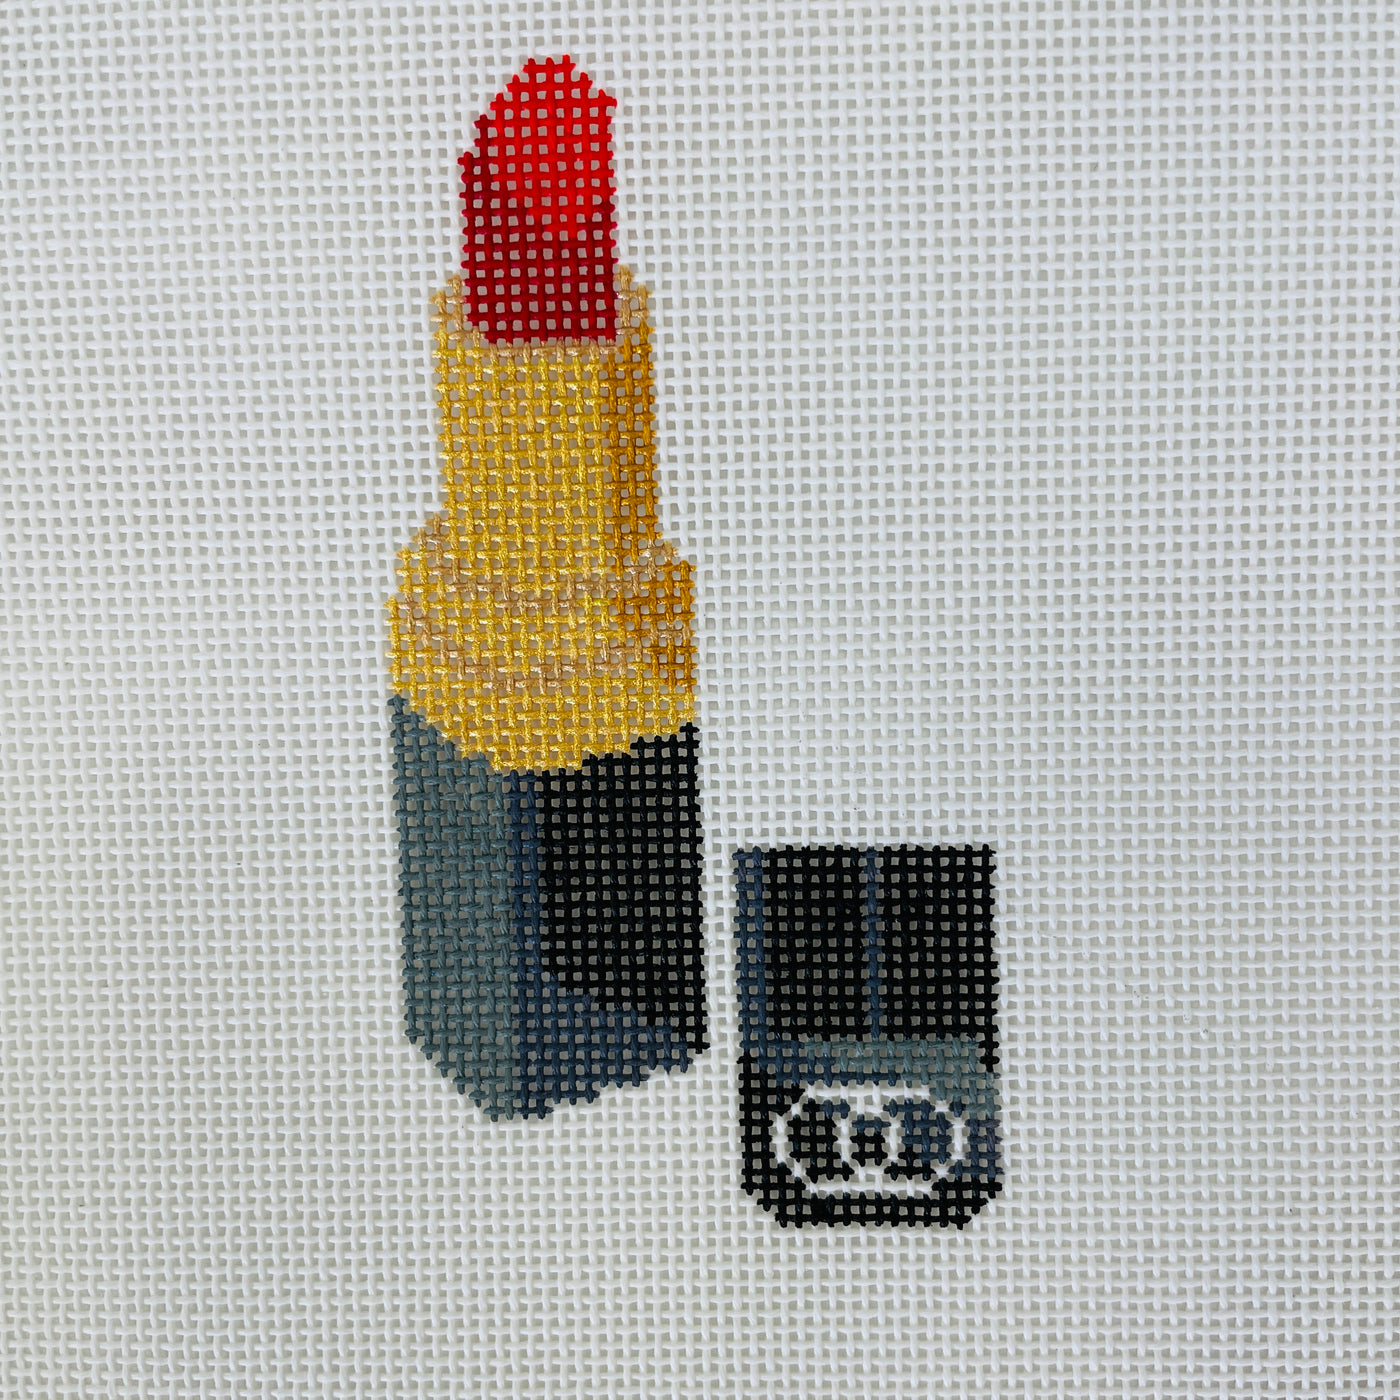 Red Lipstick Ornament Needlepoint Canvas